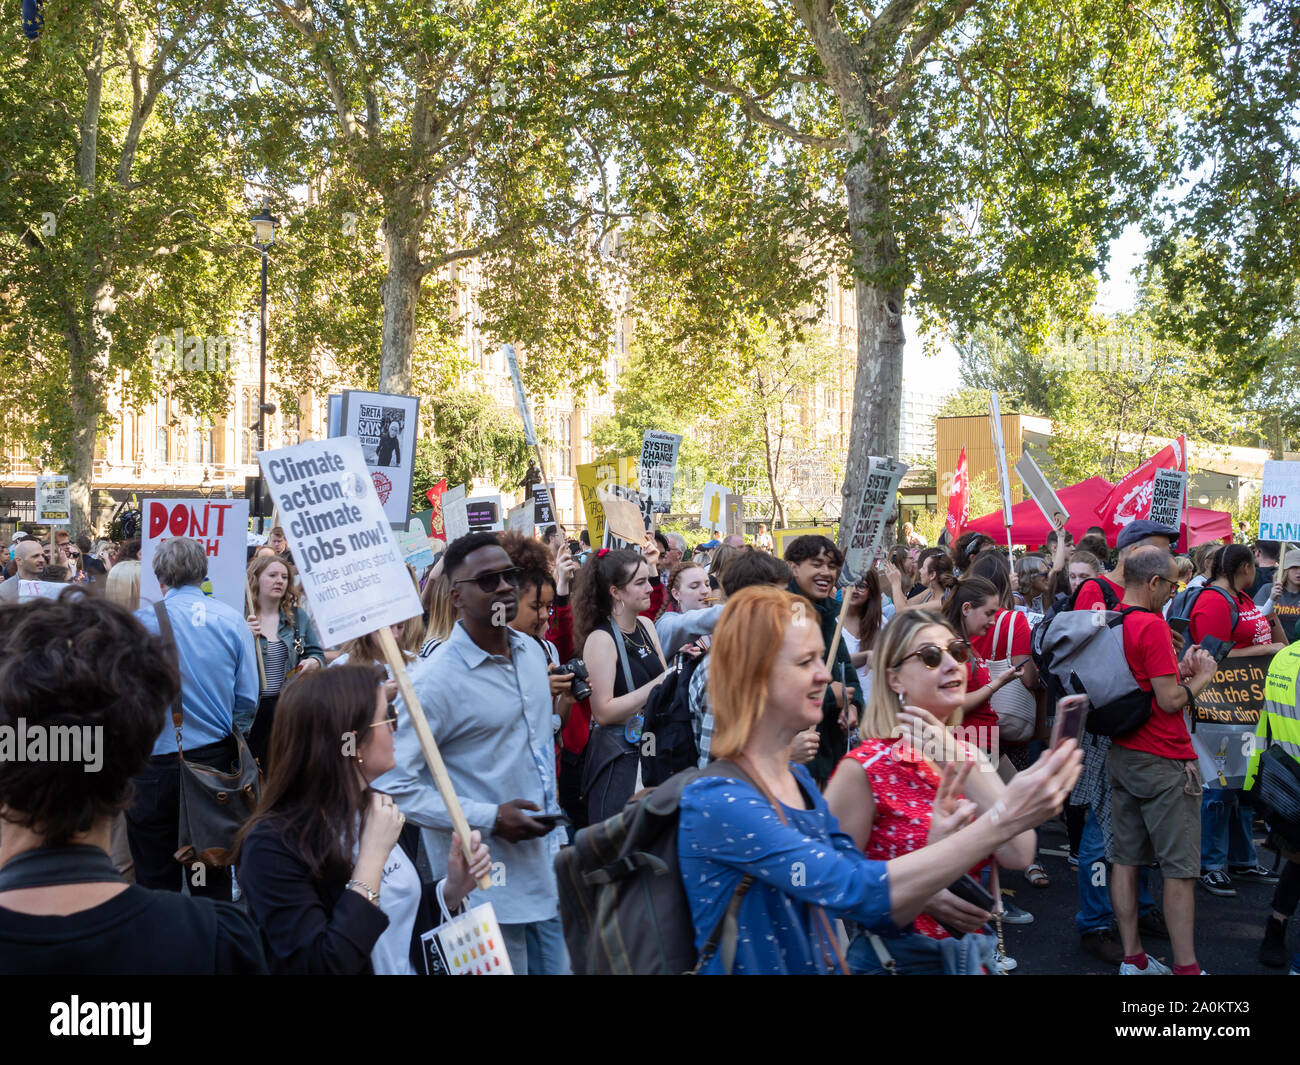 LONDON, UK - SEPTEMBER 20 2019: Crowd of people at the Global Climate Strike in London, holding placards Stock Photo